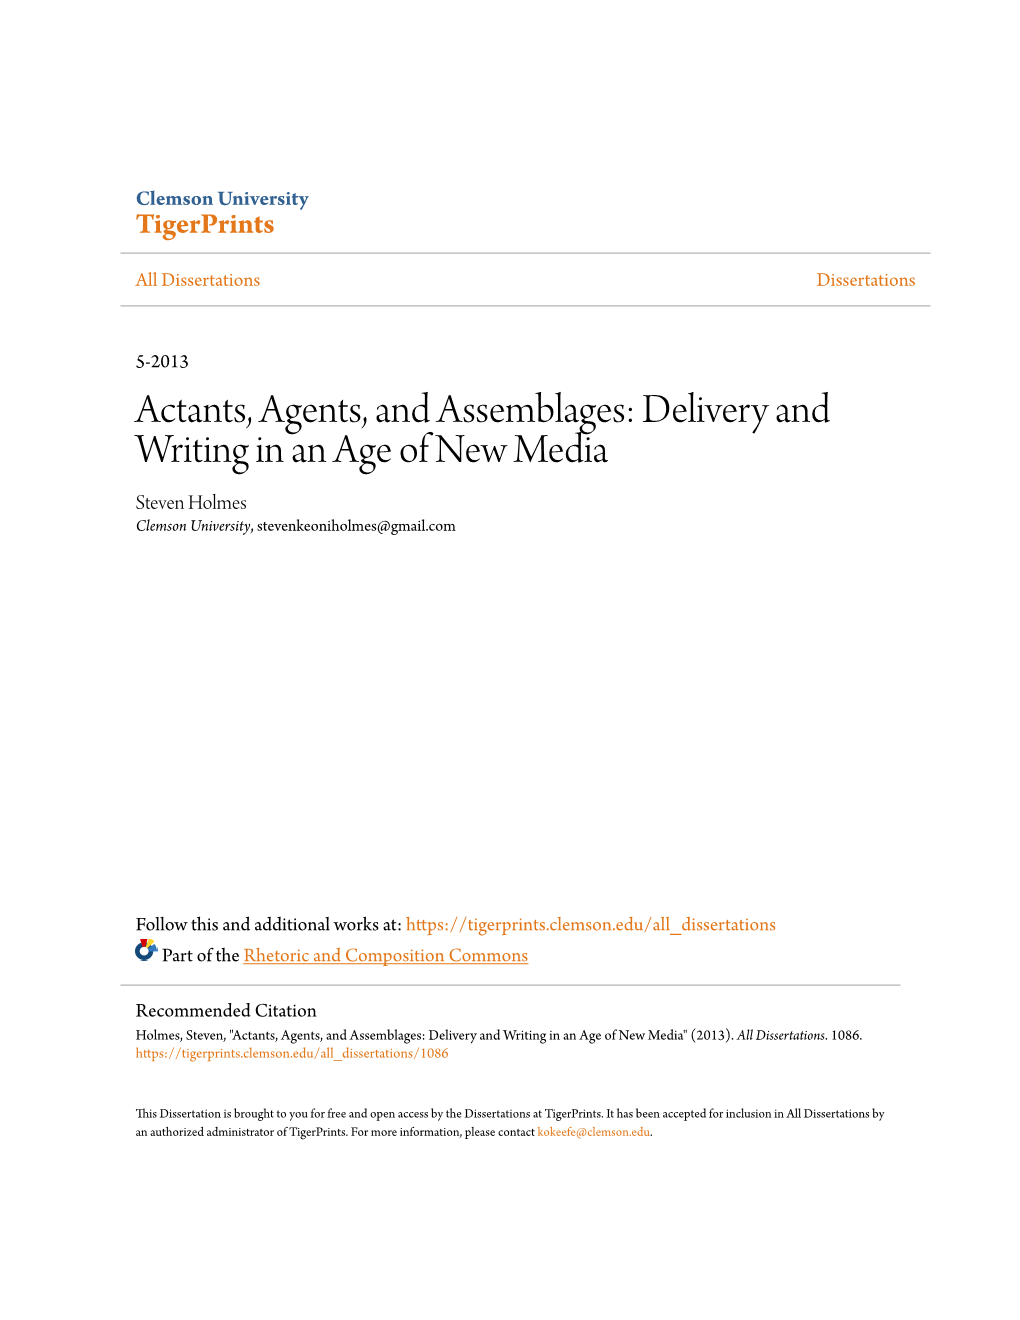 Delivery and Writing in an Age of New Media Steven Holmes Clemson University, Stevenkeoniholmes@Gmail.Com